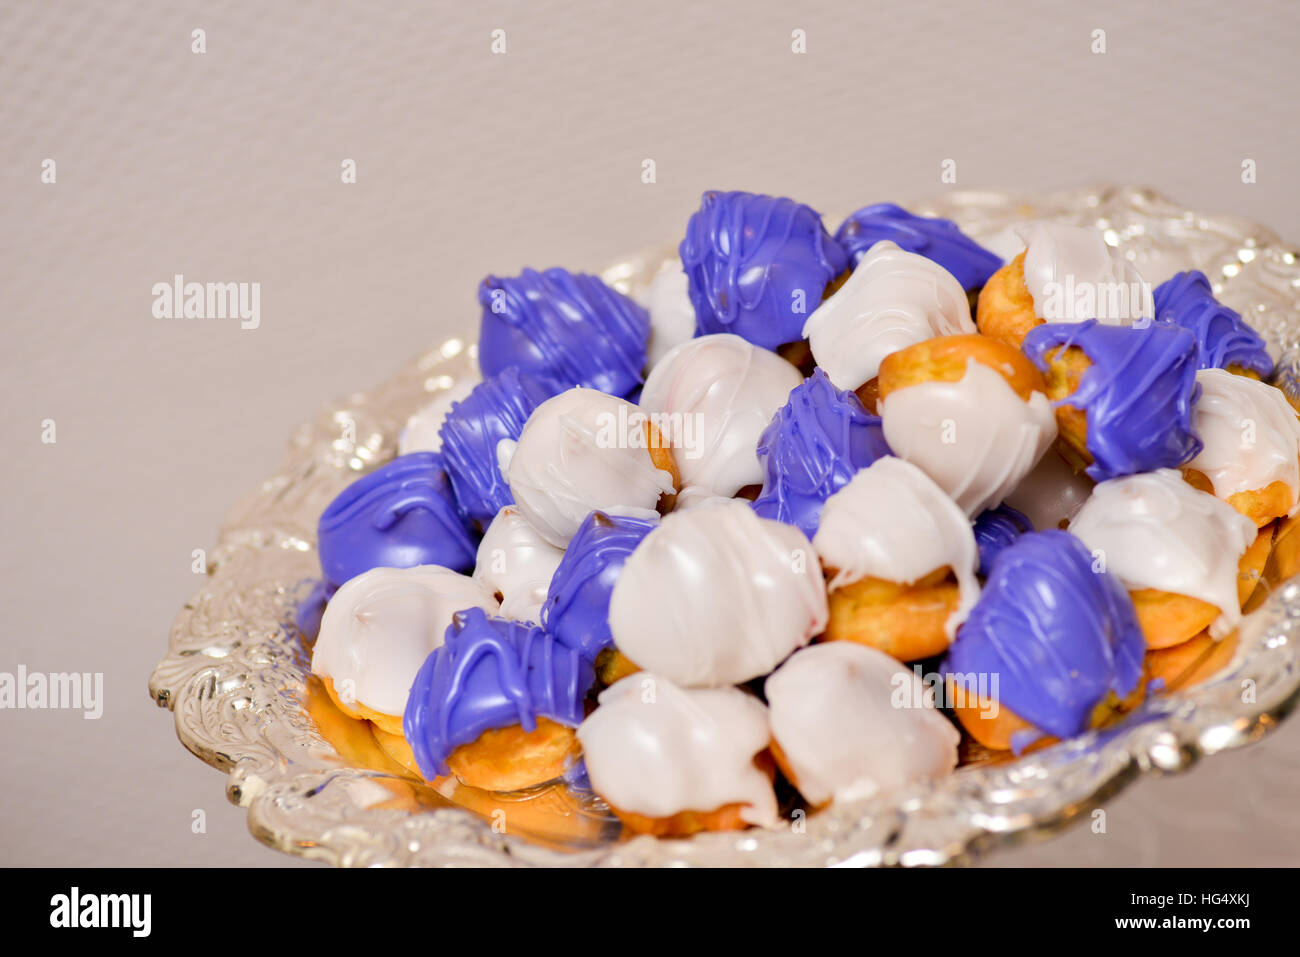 Cakes filled with cream frosting purple and white in daylight Stock Photo